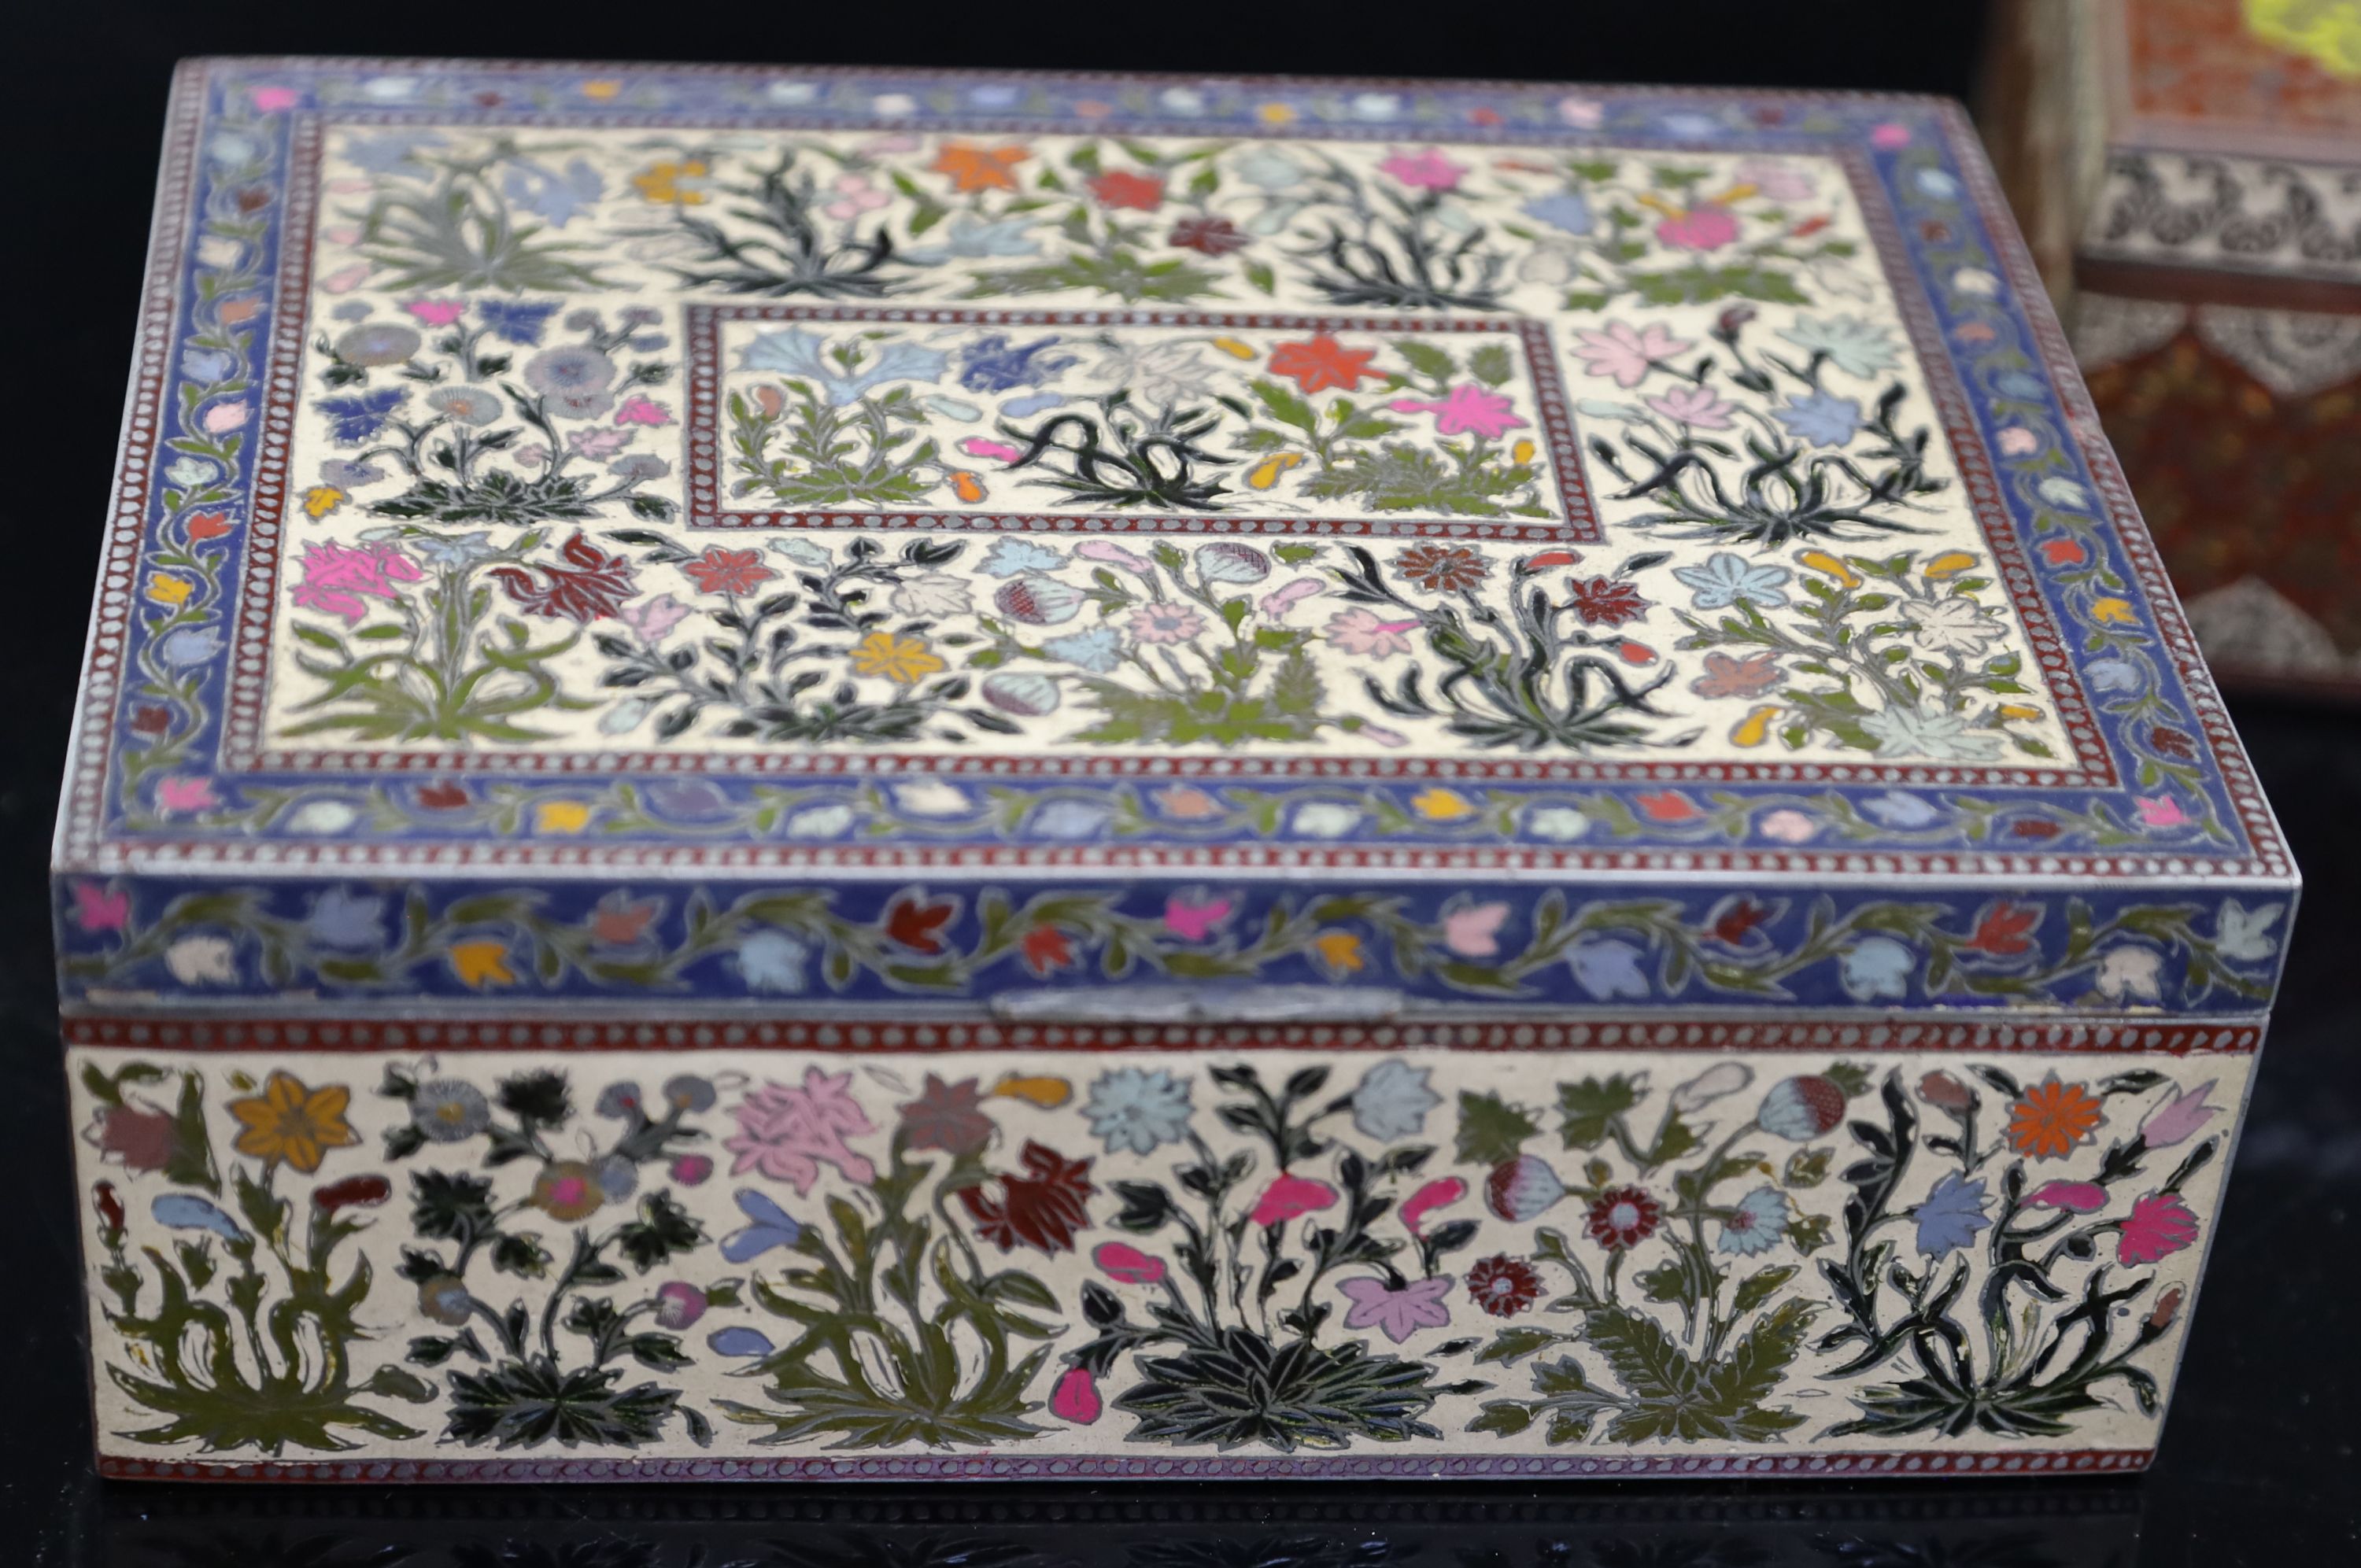 Two late 19th century Indian polychrome champleve enamelled cigar boxes, 22cm and 20cm